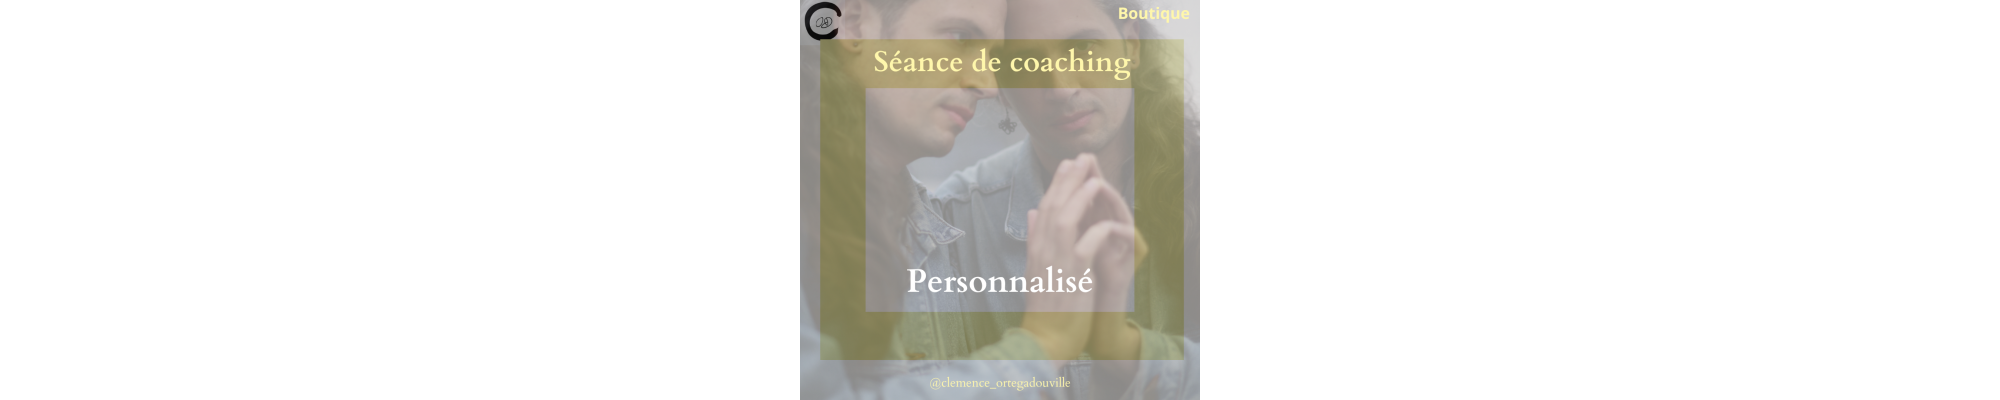 Coaching et formations